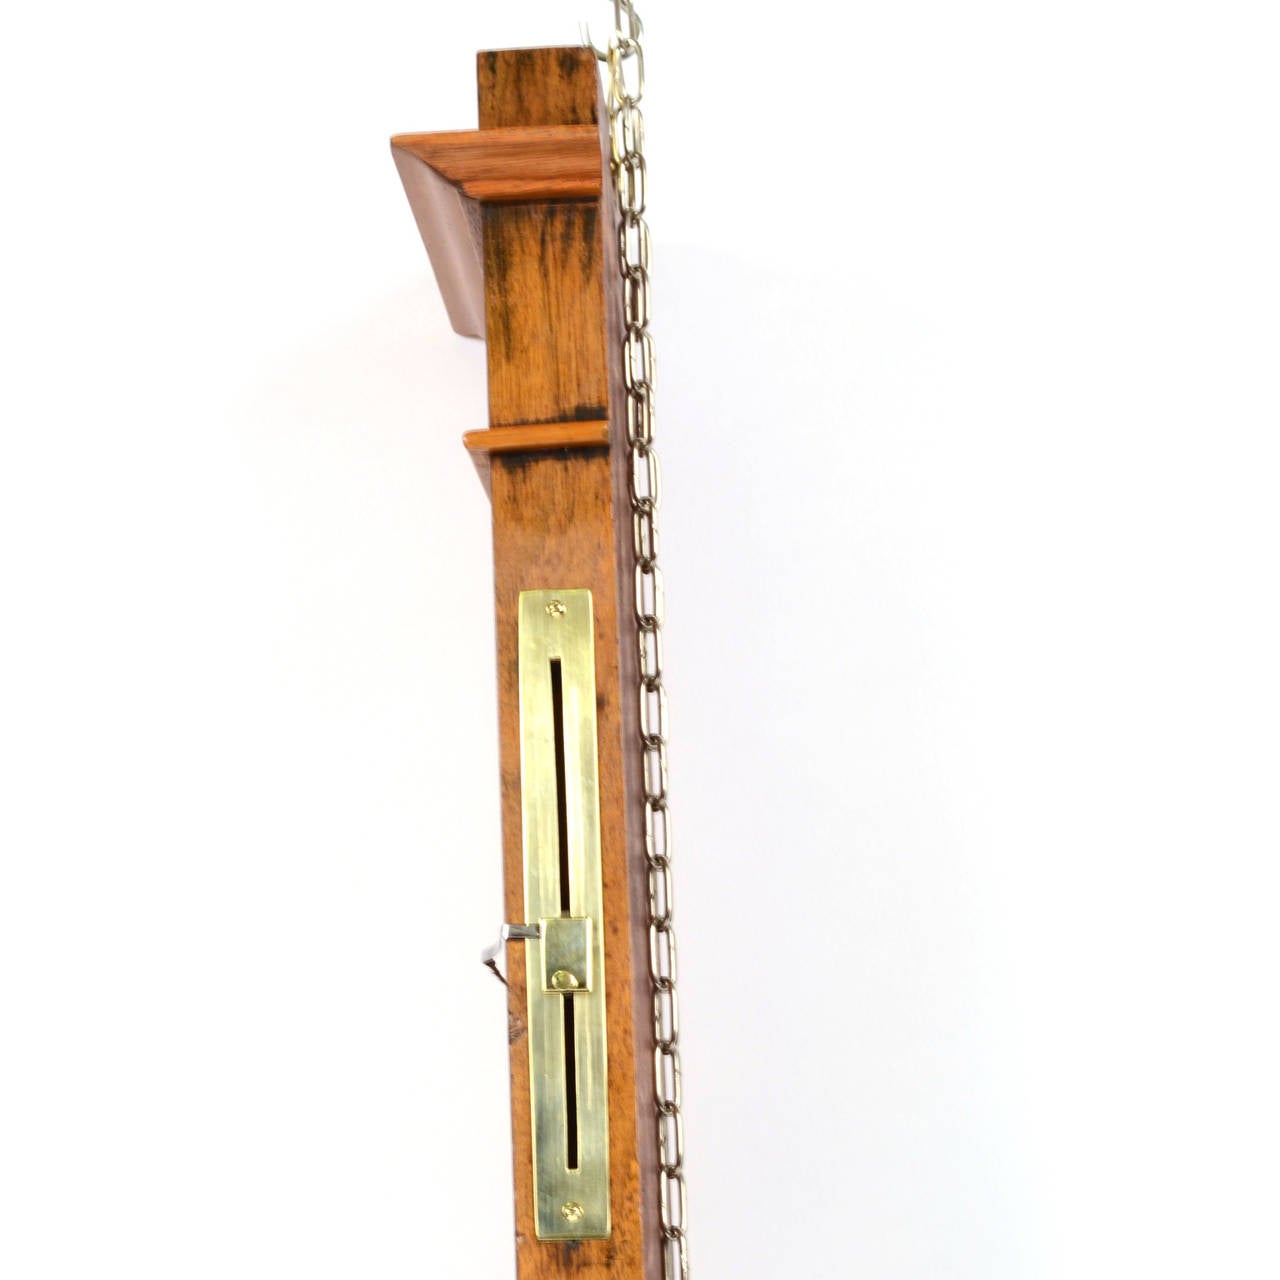 the first barometer